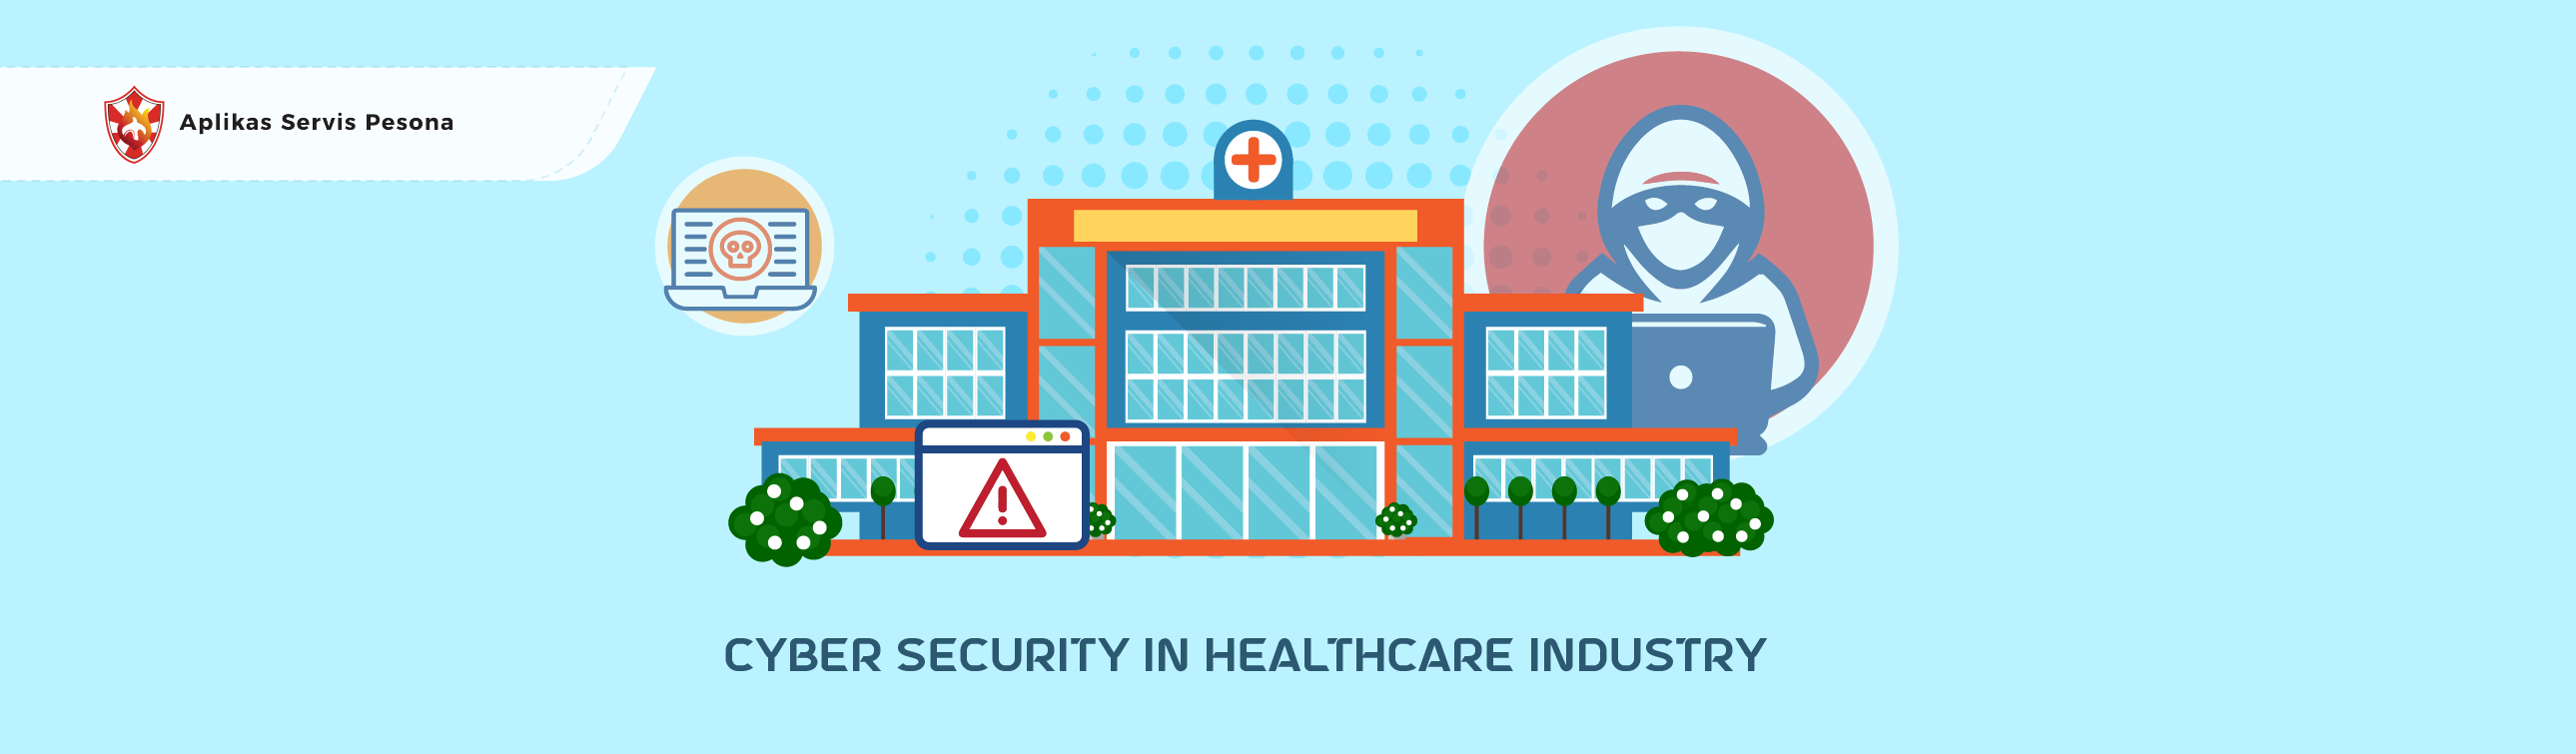 Placing Cyber Security at the Core of Transformation in Healthcare Industry